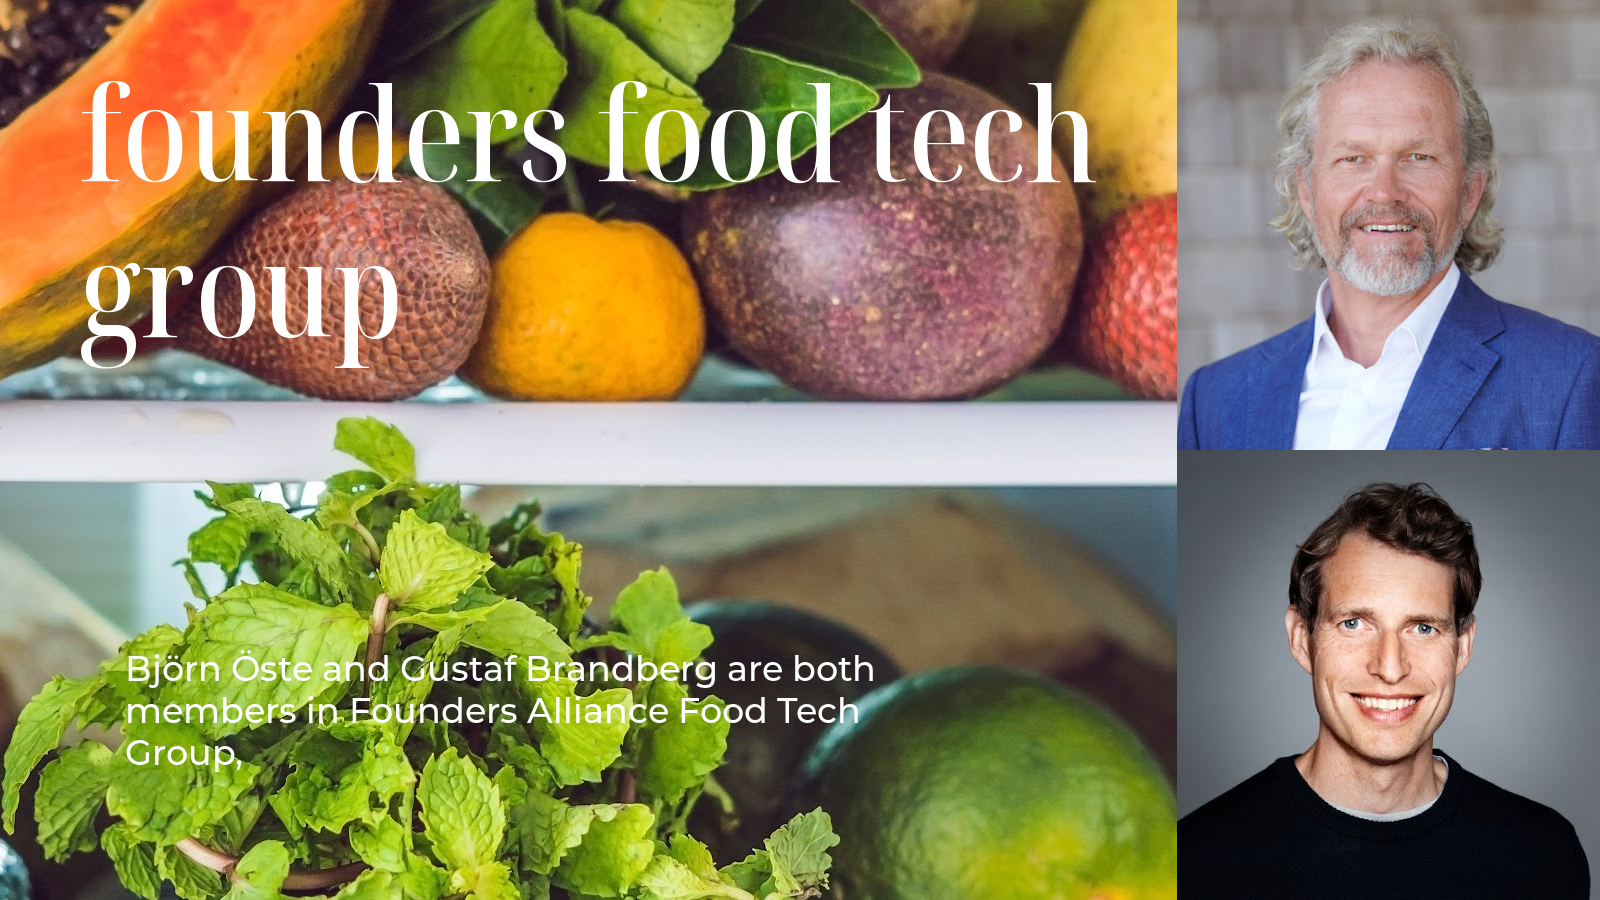 Founders Alliance Food Tech Group